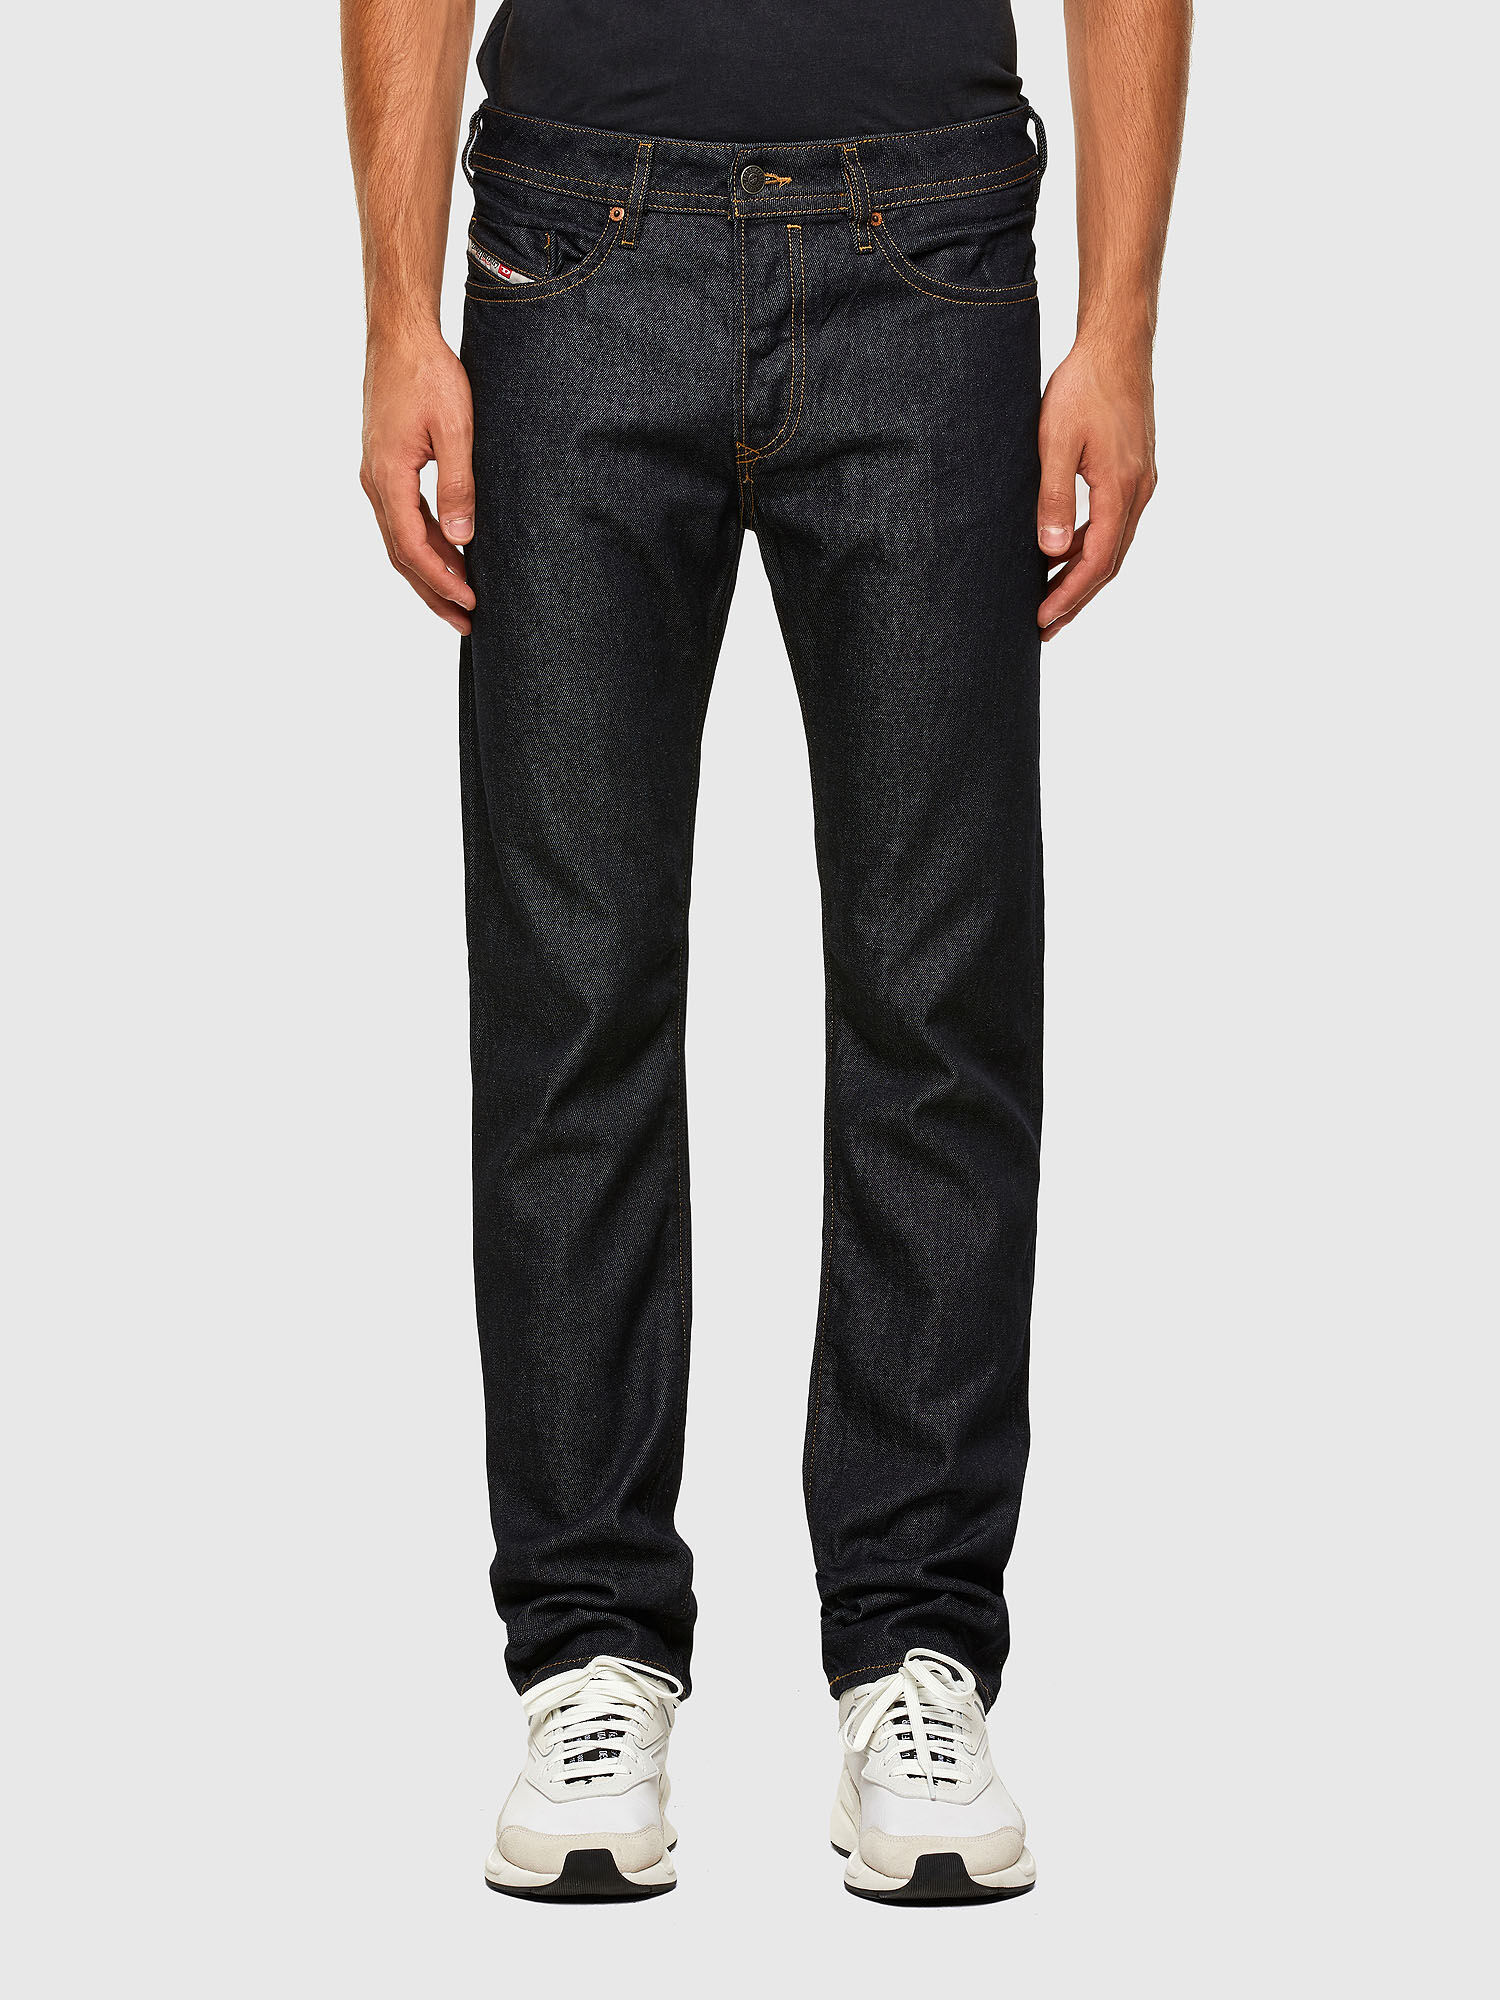 Buster Tapered Jeans 009HF: Dark Blue 